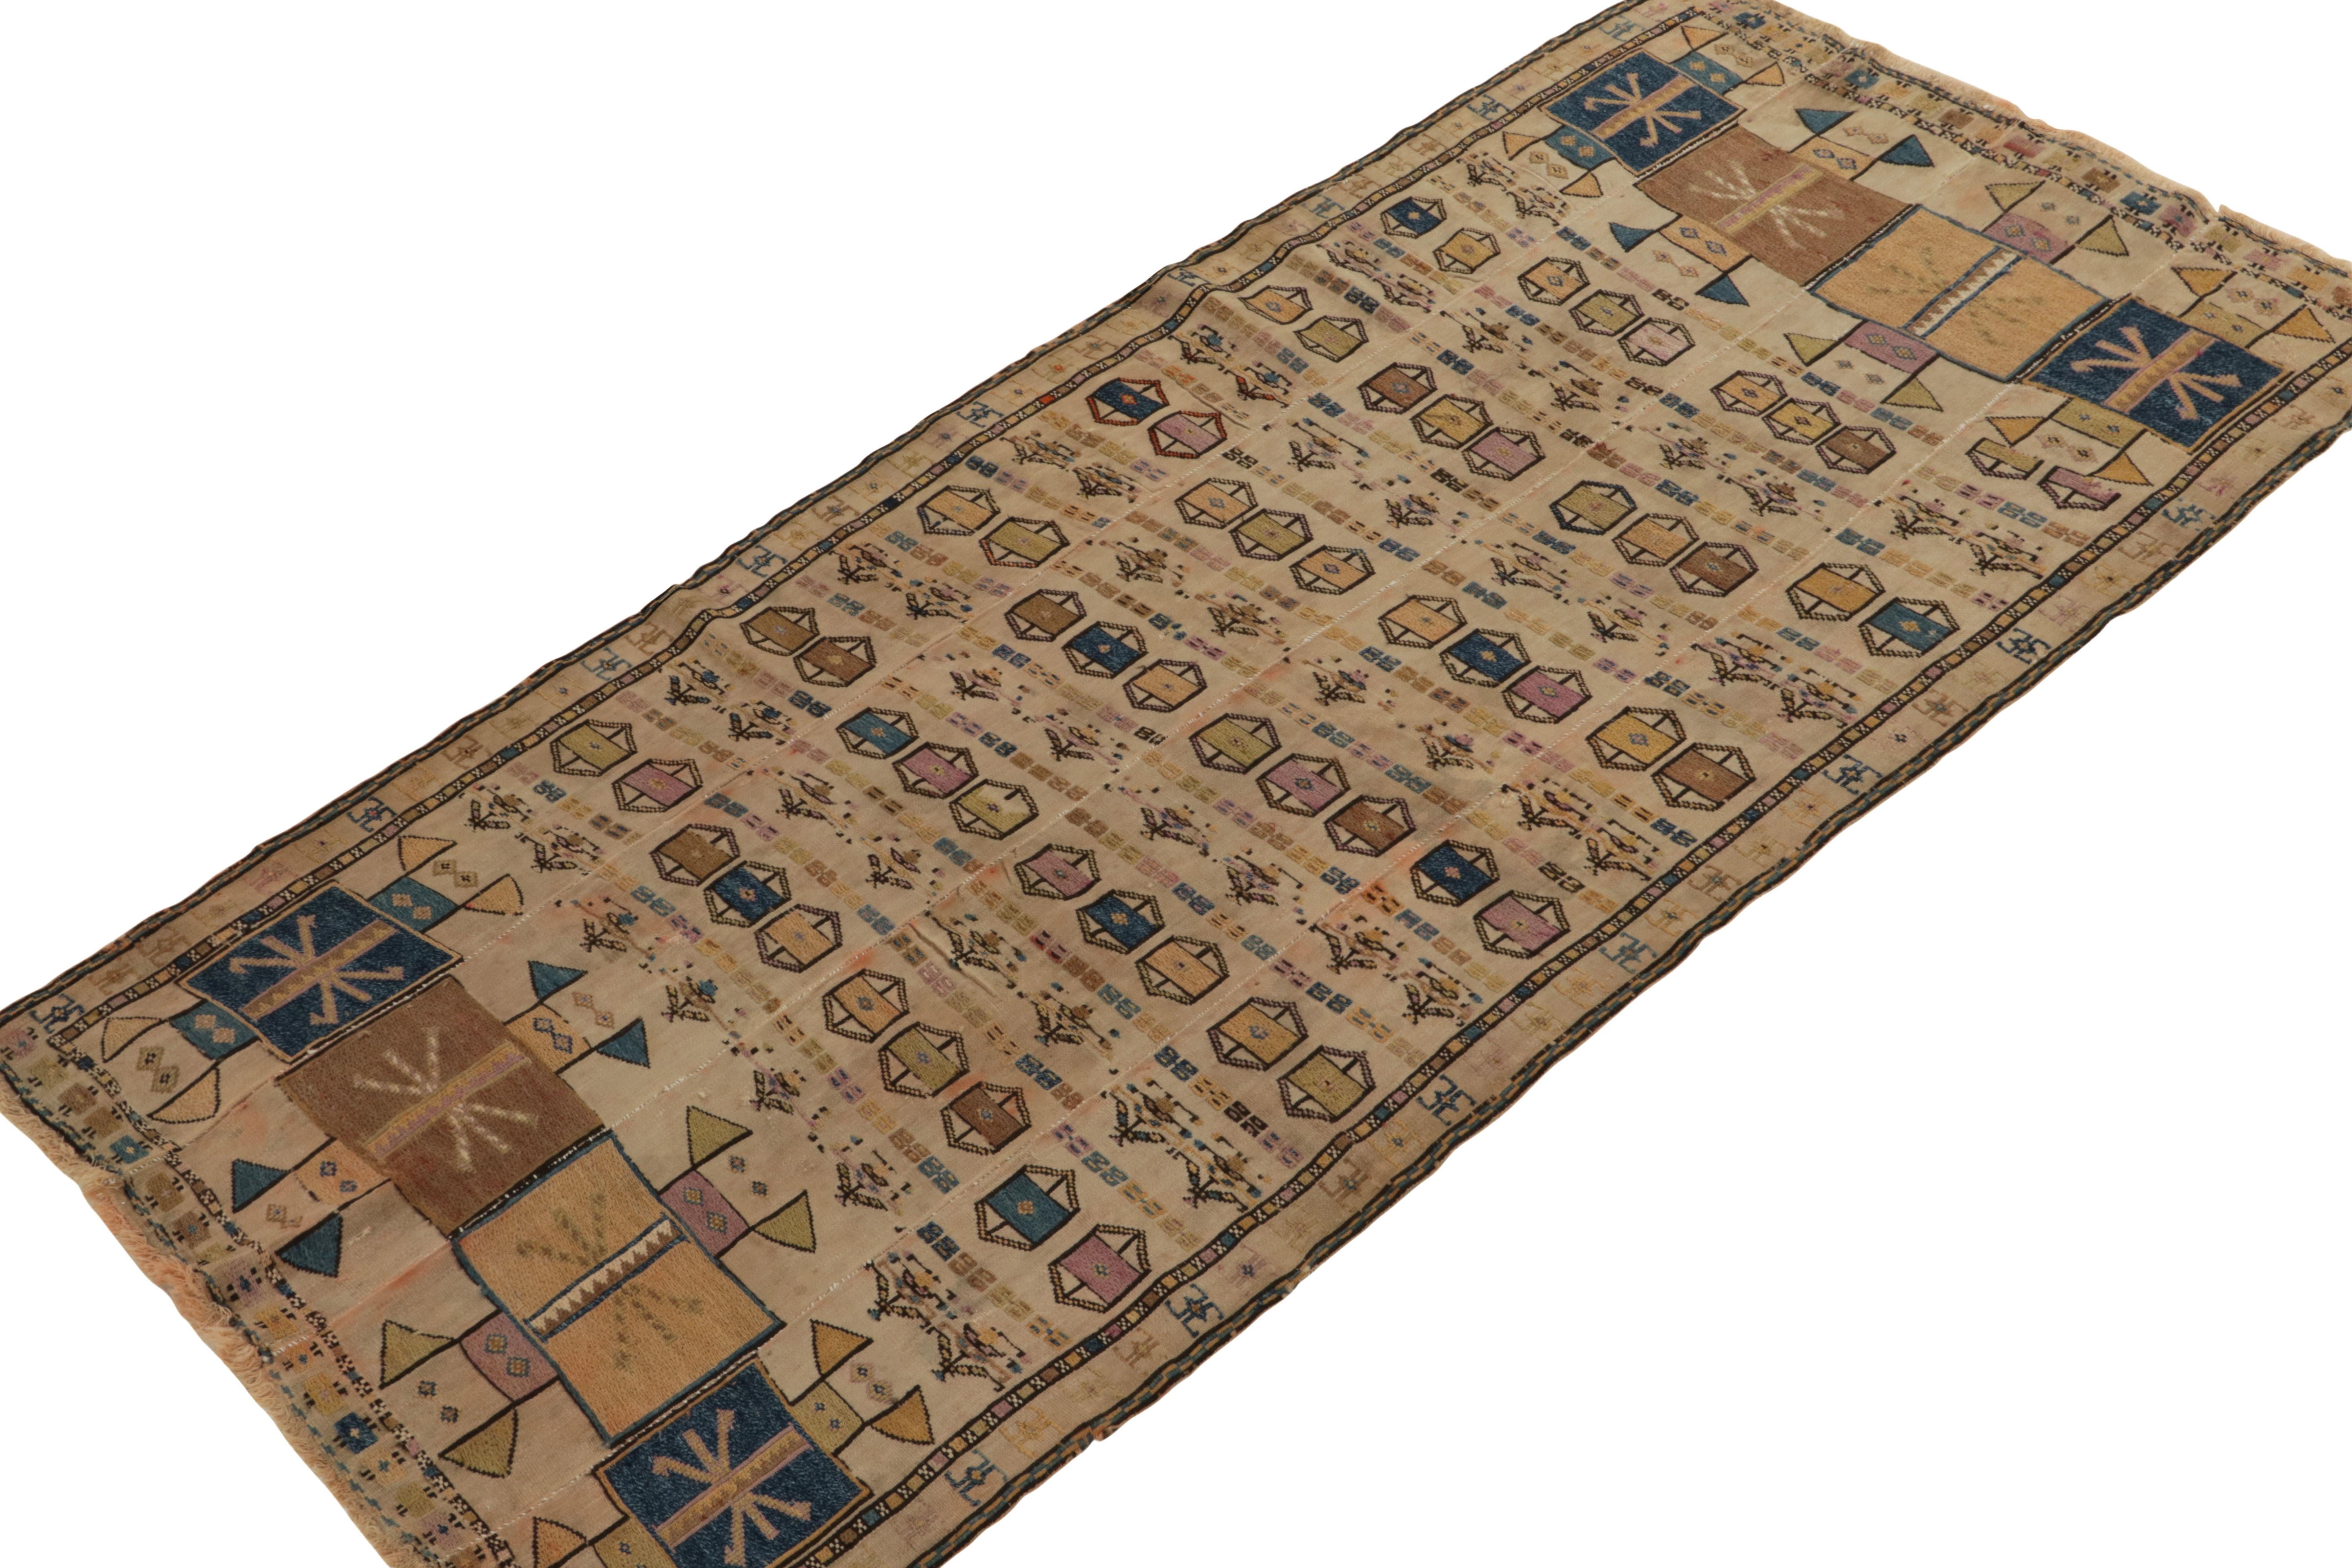 Handwoven in wool from Persia originating between 1920-1930, a 4x7 antique Verneh kilim enjoying an individualistic personality & impeccable artistic interpretations of the style. 

The masterpiece exemplifies a distinctive flat weaving technique